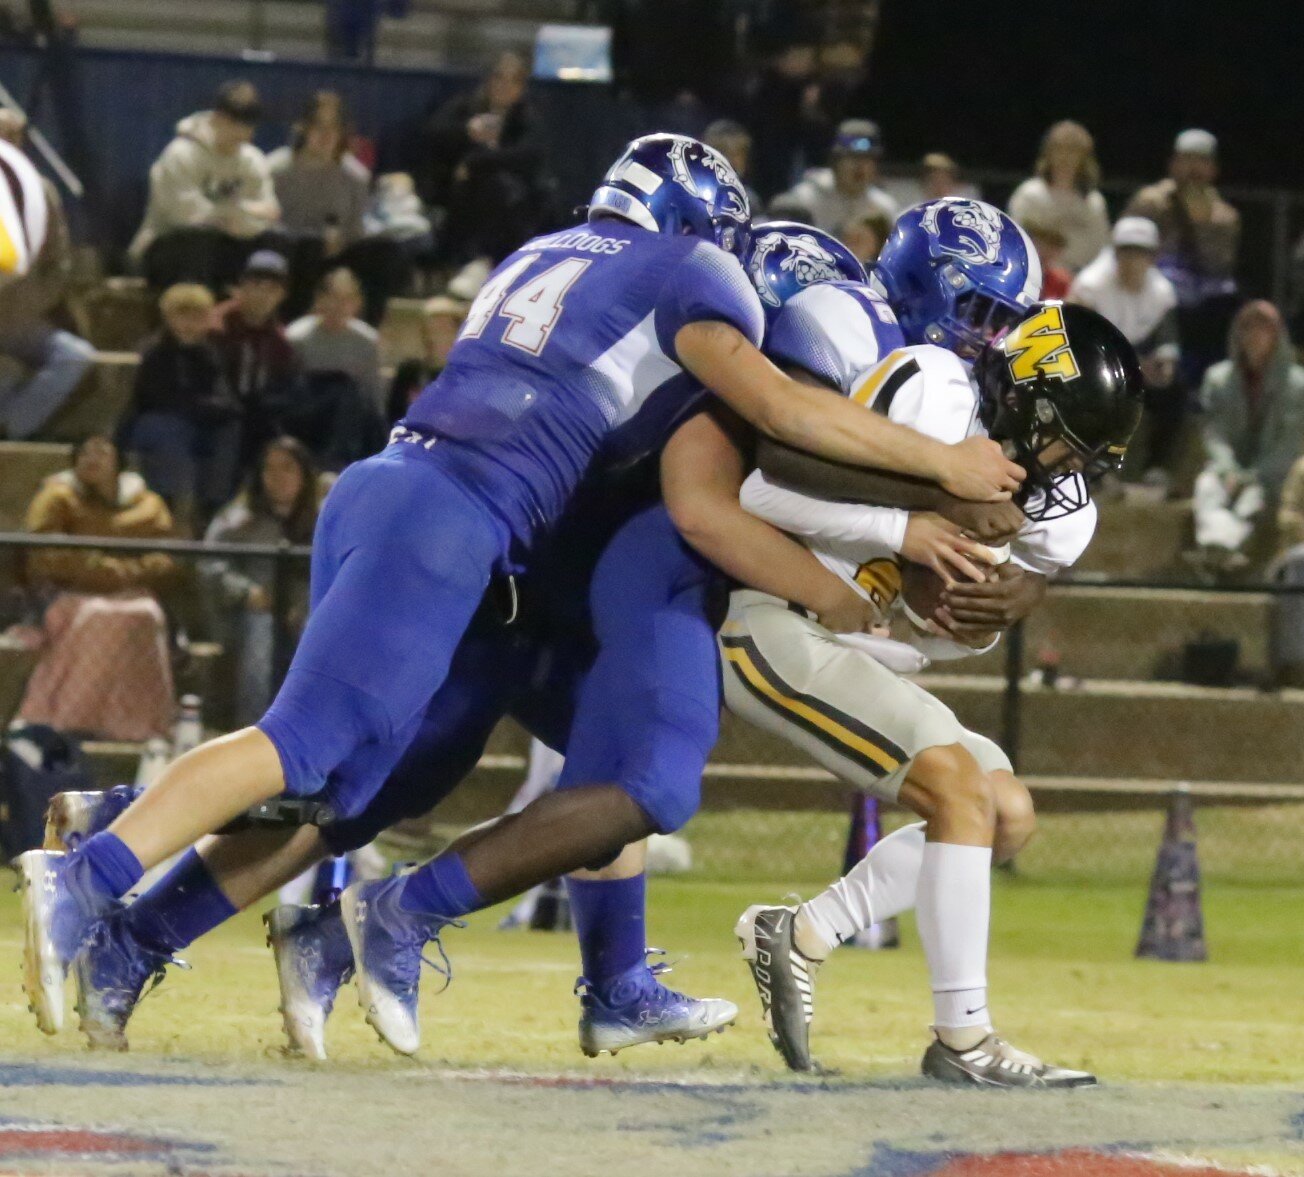 Landon Green, Michael Hipp and Devon Robertson overwhelm a Winona ball-carrier in Quitman’s victory Friday.